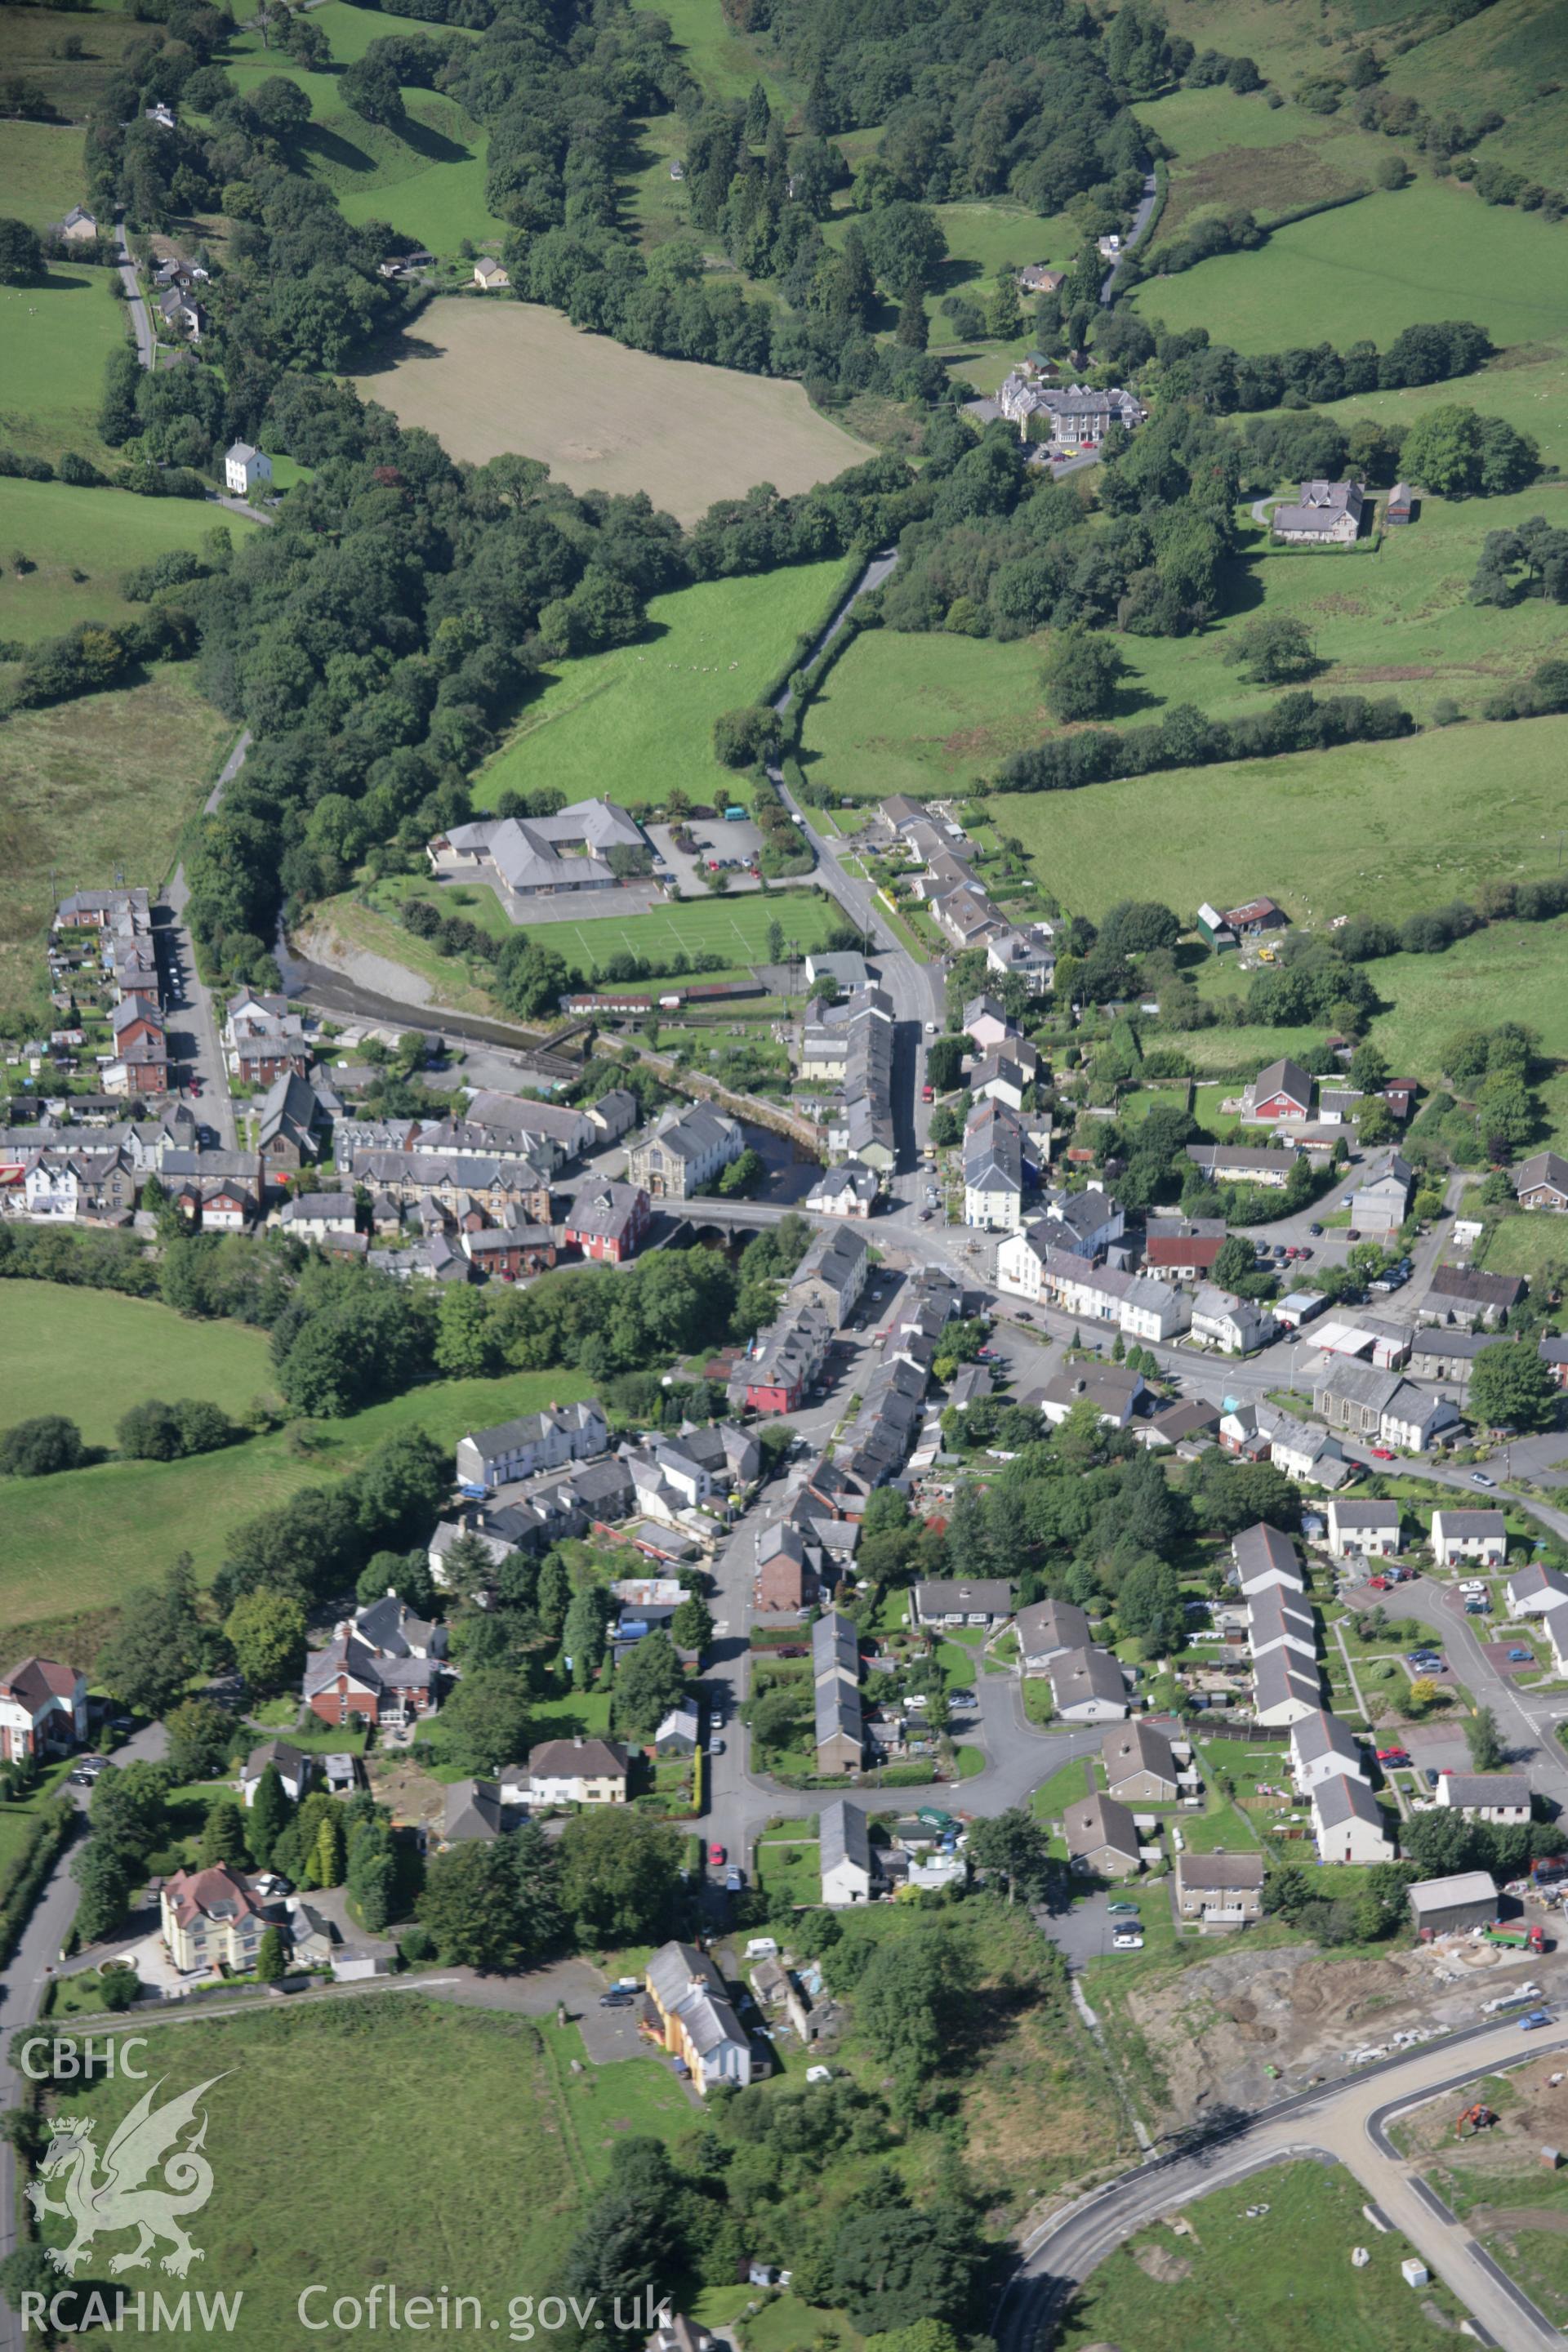 RCAHMW colour oblique aerial photograph of Llanwrtyd Wells town with view from south-east. Taken on 02 September 2005 by Toby Driver